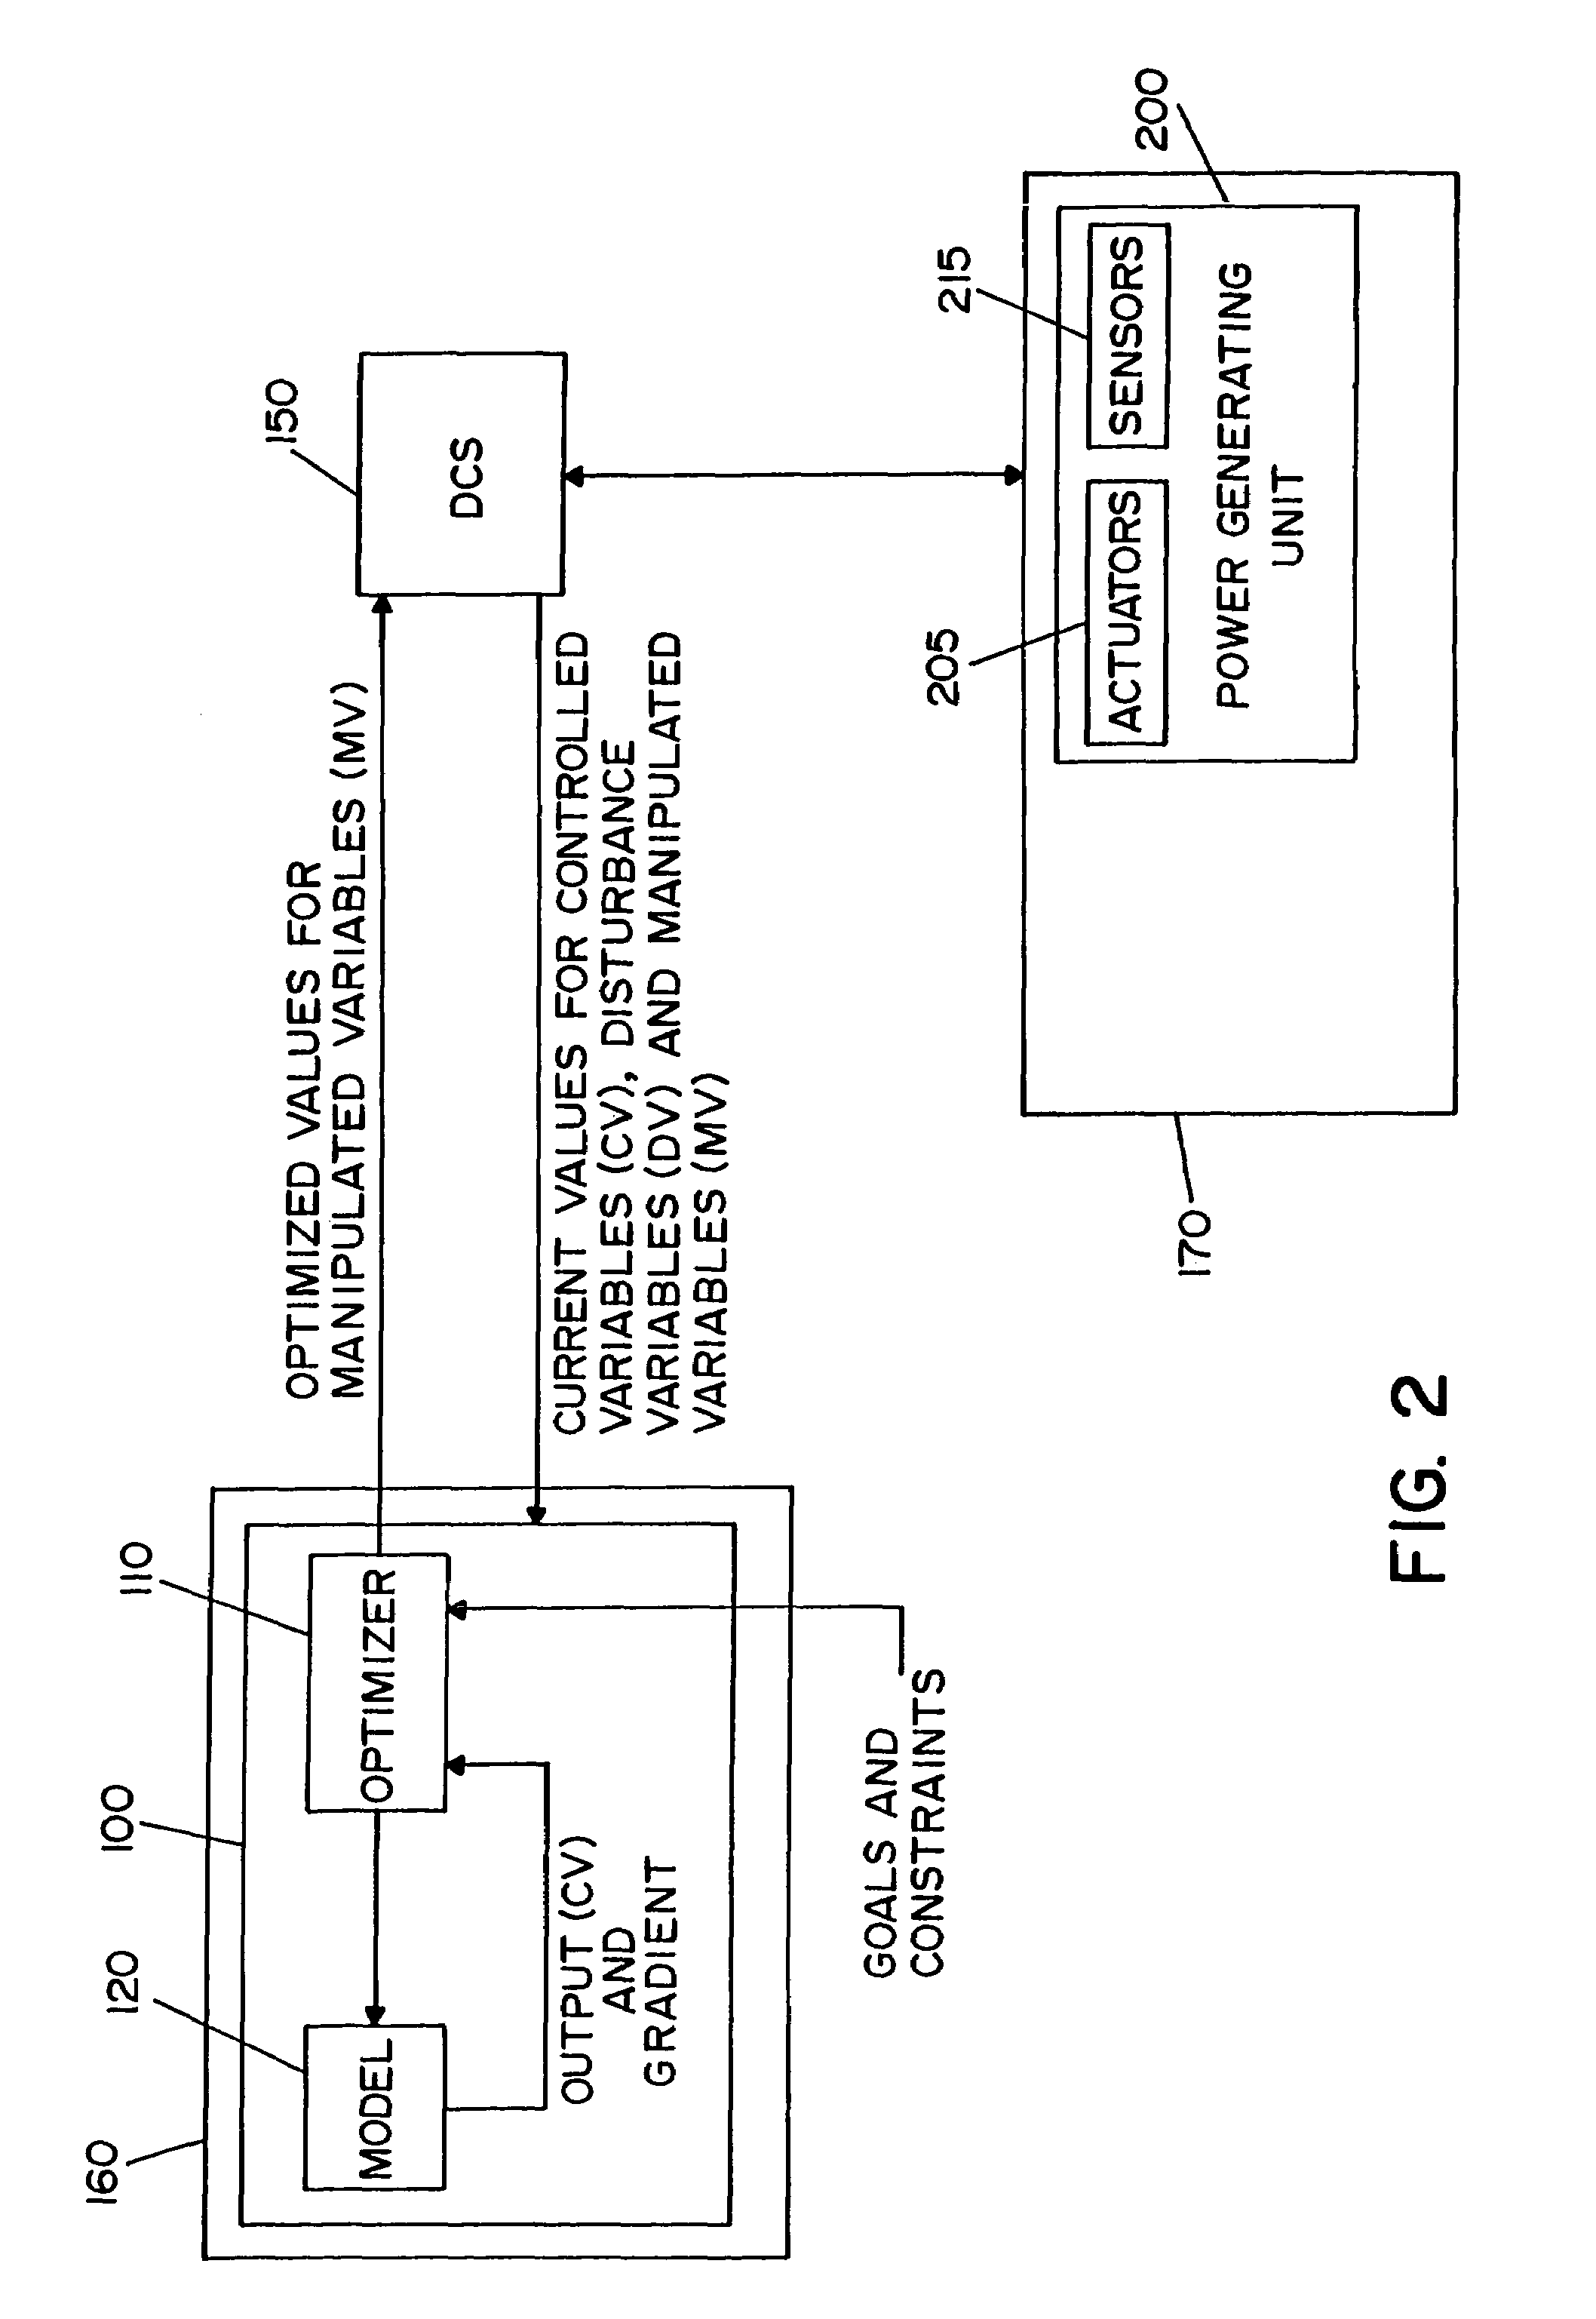 Model based sequential optimization of a single or multiple power generating units